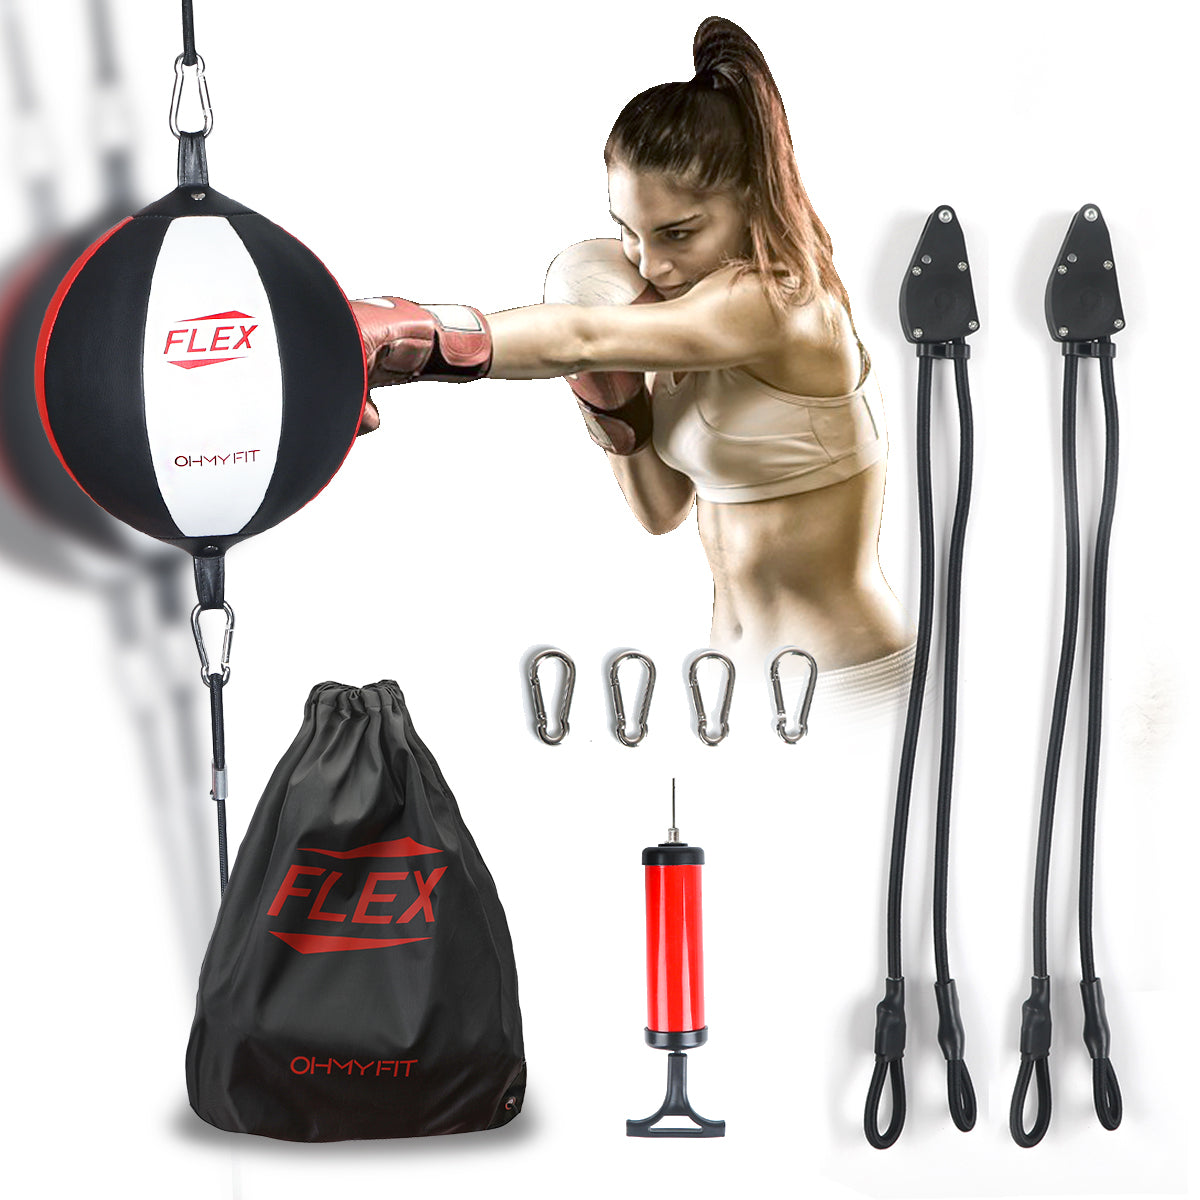 OHMY FIT FLEX Double End Punching Bag Easily Adjust Tension and Height of Cords with Special Flex Adjustable System. Advance Microfiber Material Strong Bladder Speed Bag Gym Exercise for Men&Women (Elliptical)